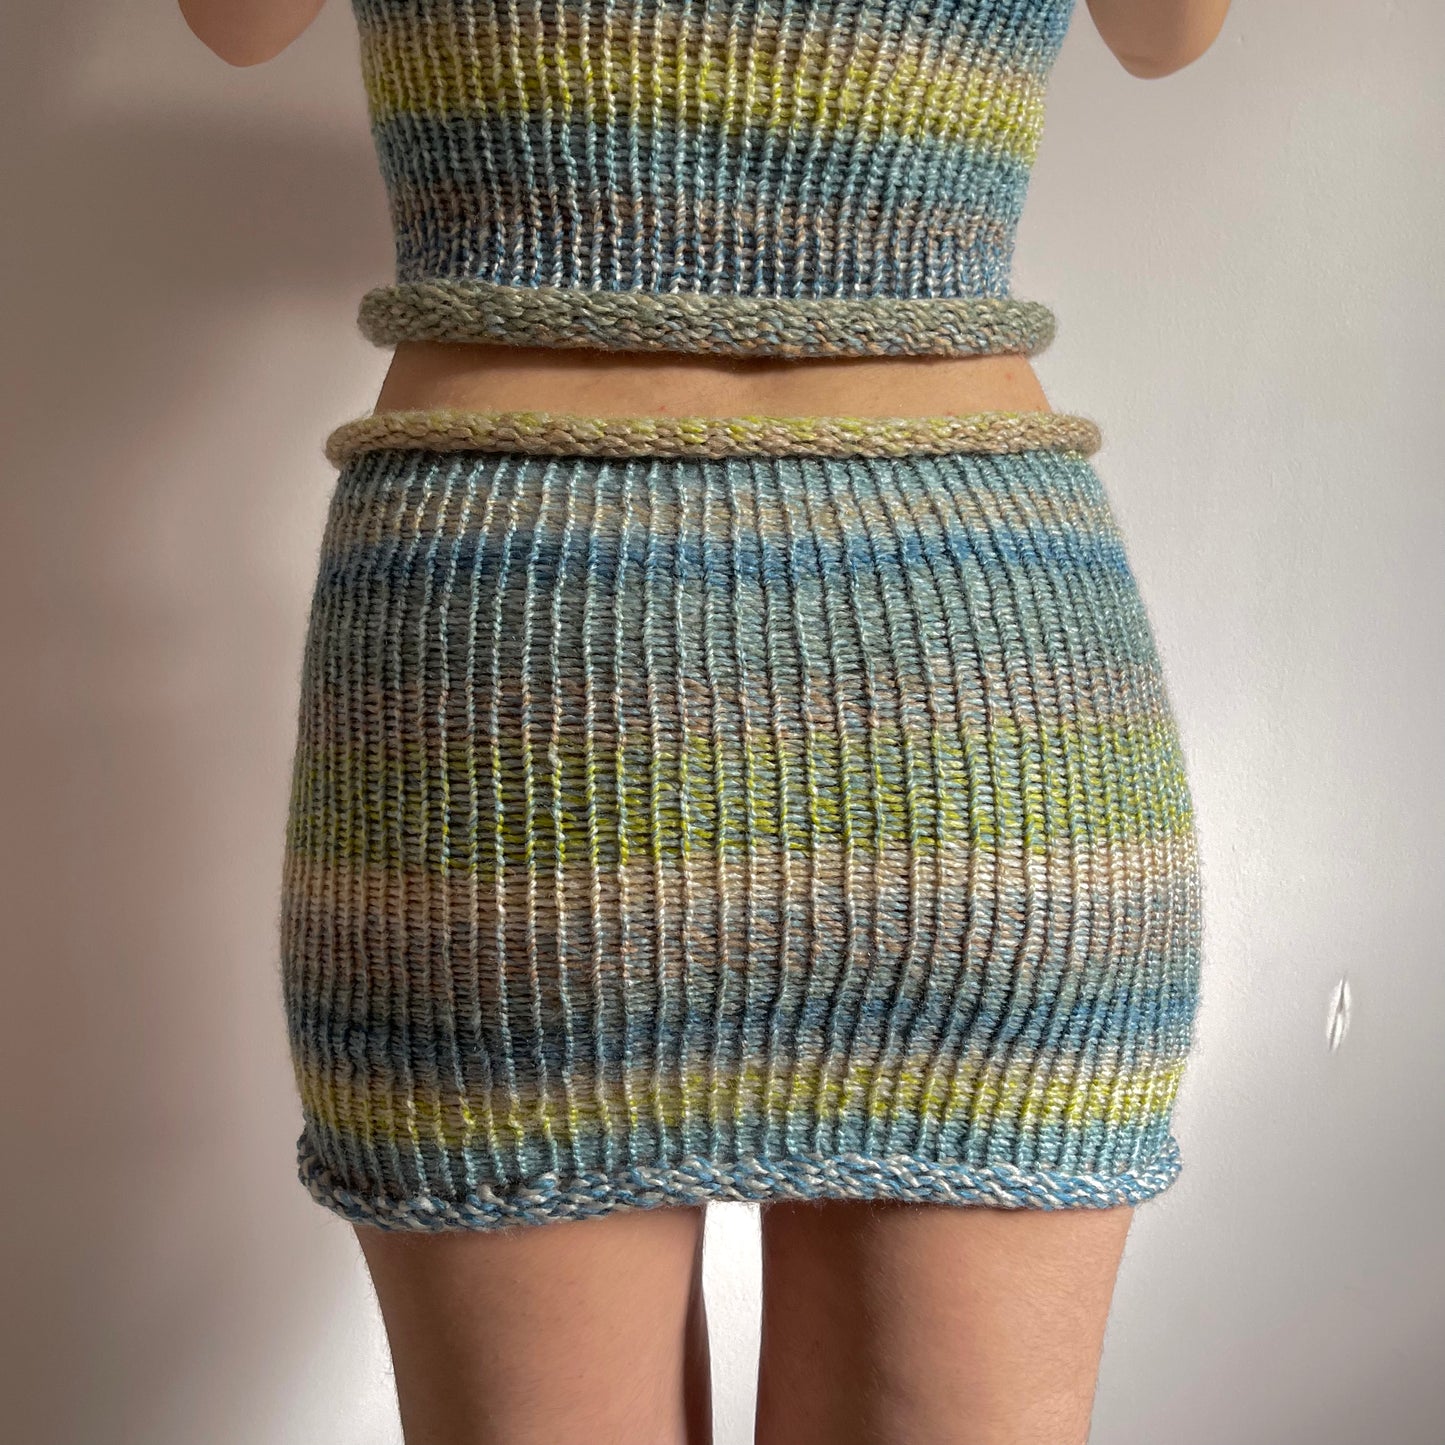 Handmade knitted mini skirt in green, beige, yellow and blue